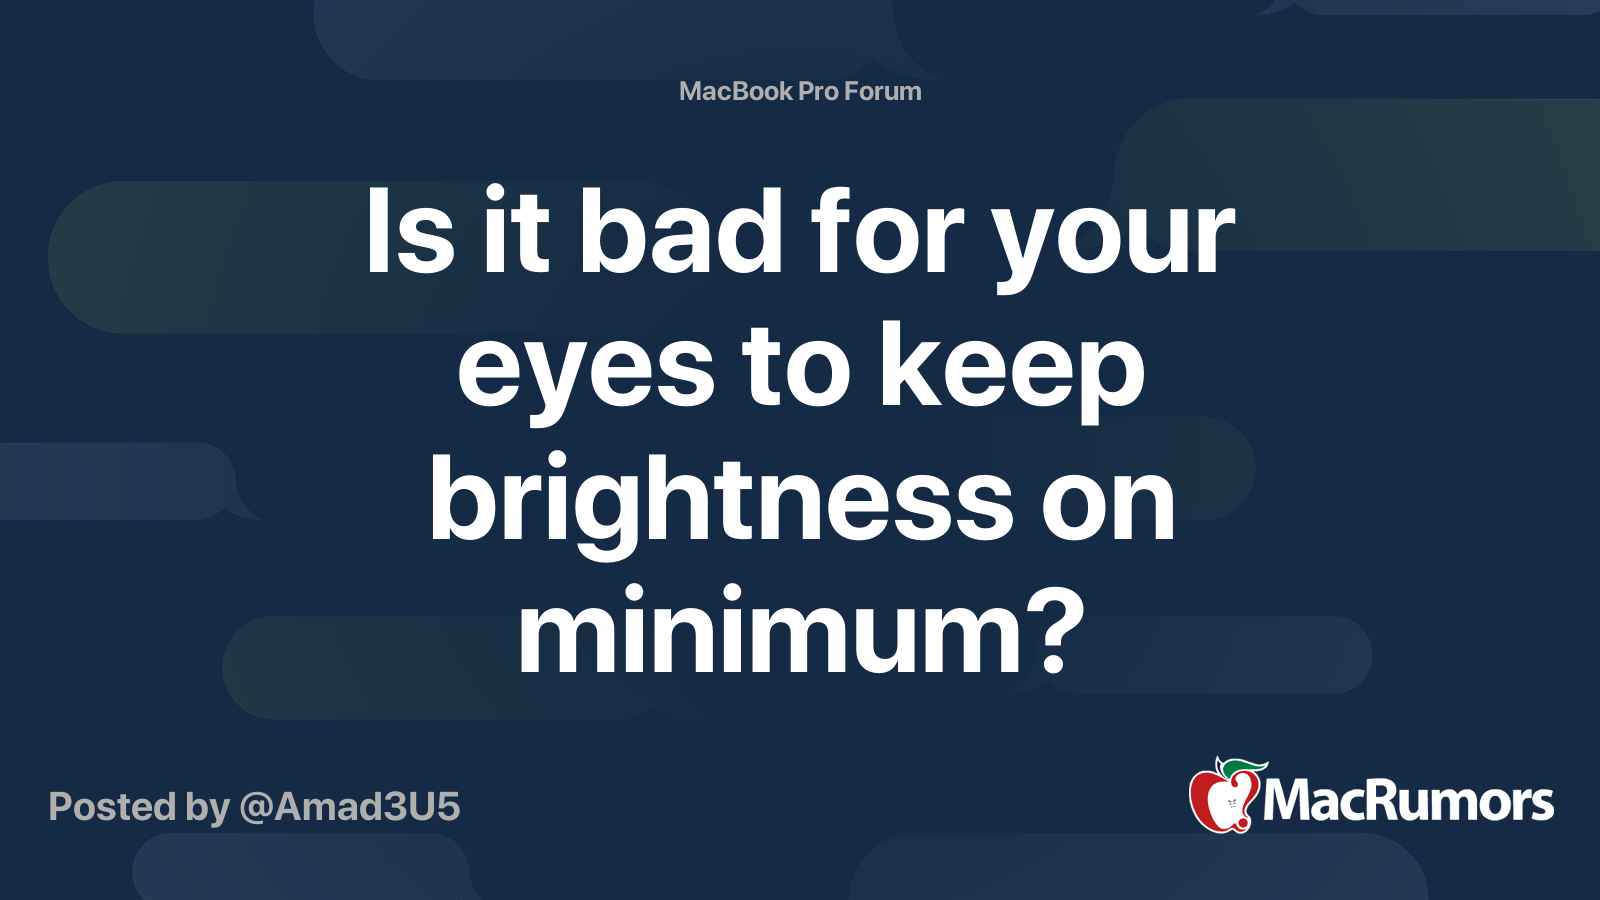 Is High brightness bad for eyes?